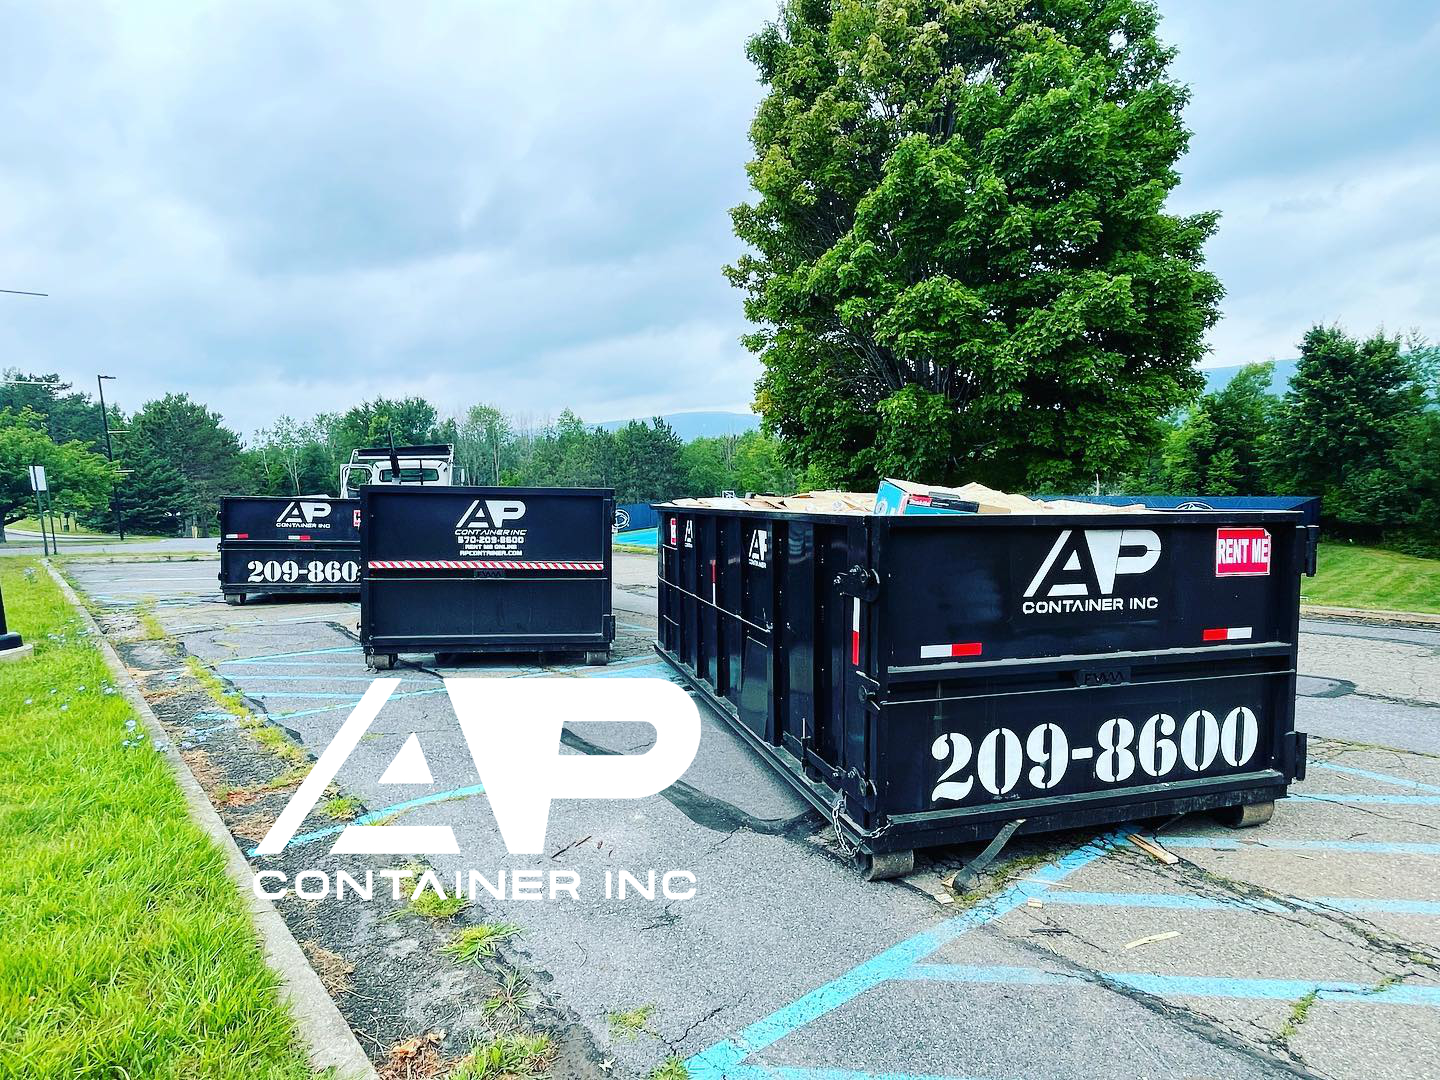 Residential Dumpster Rental AP Container Carbondale PA